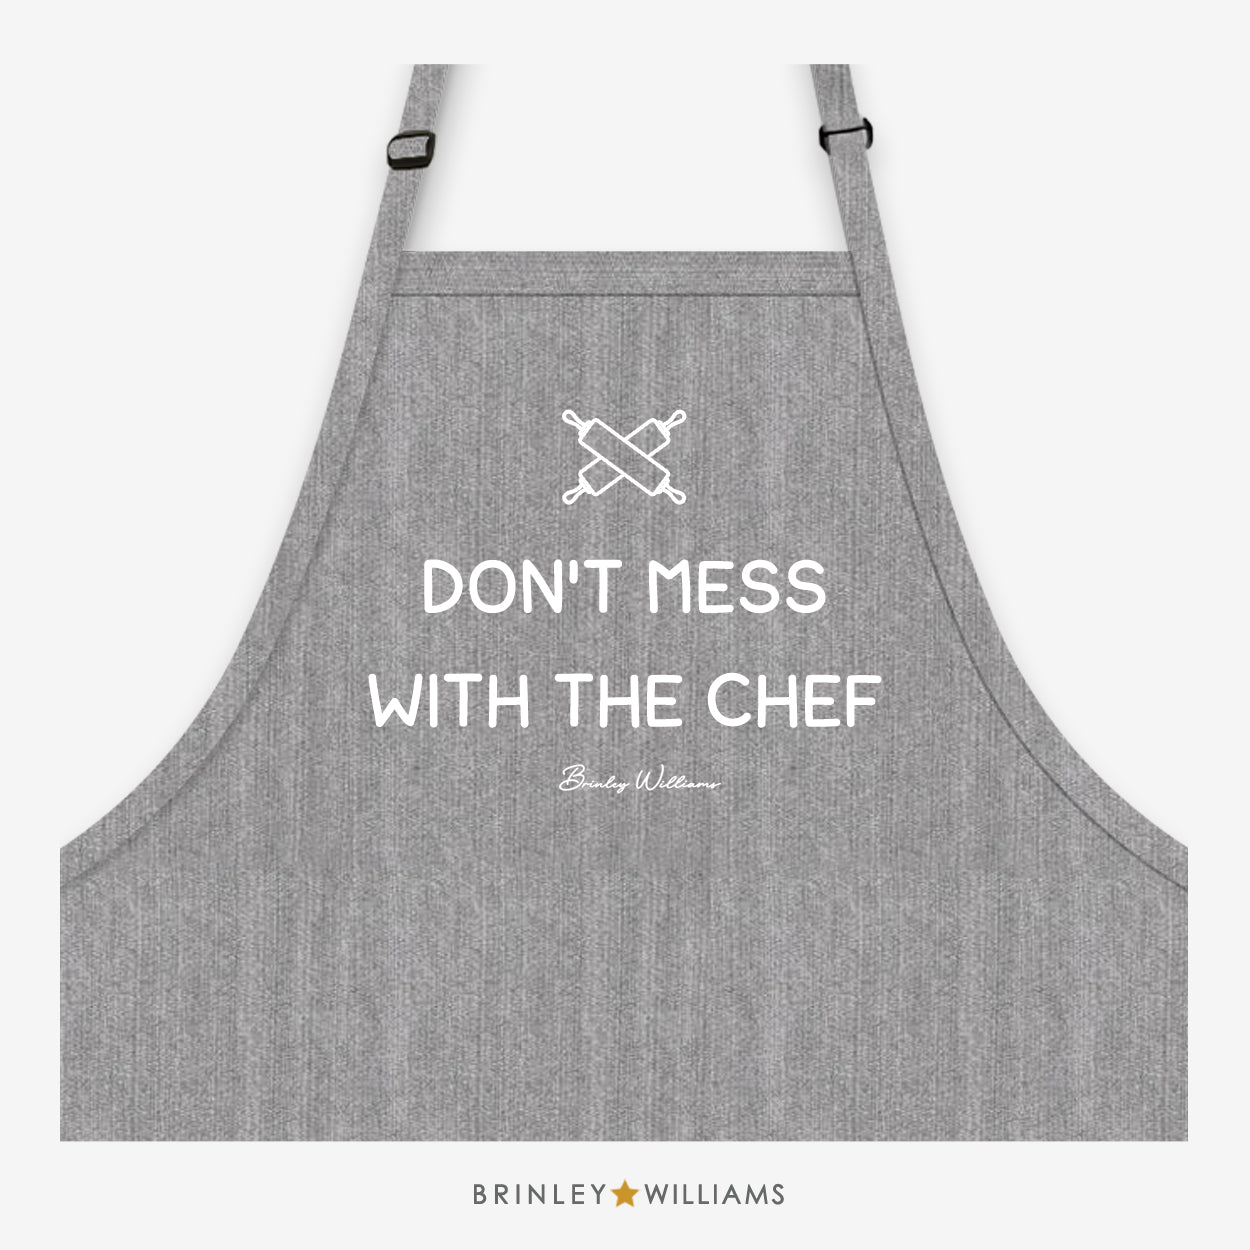 Don't mess with the Chef Apron - Grey Denim